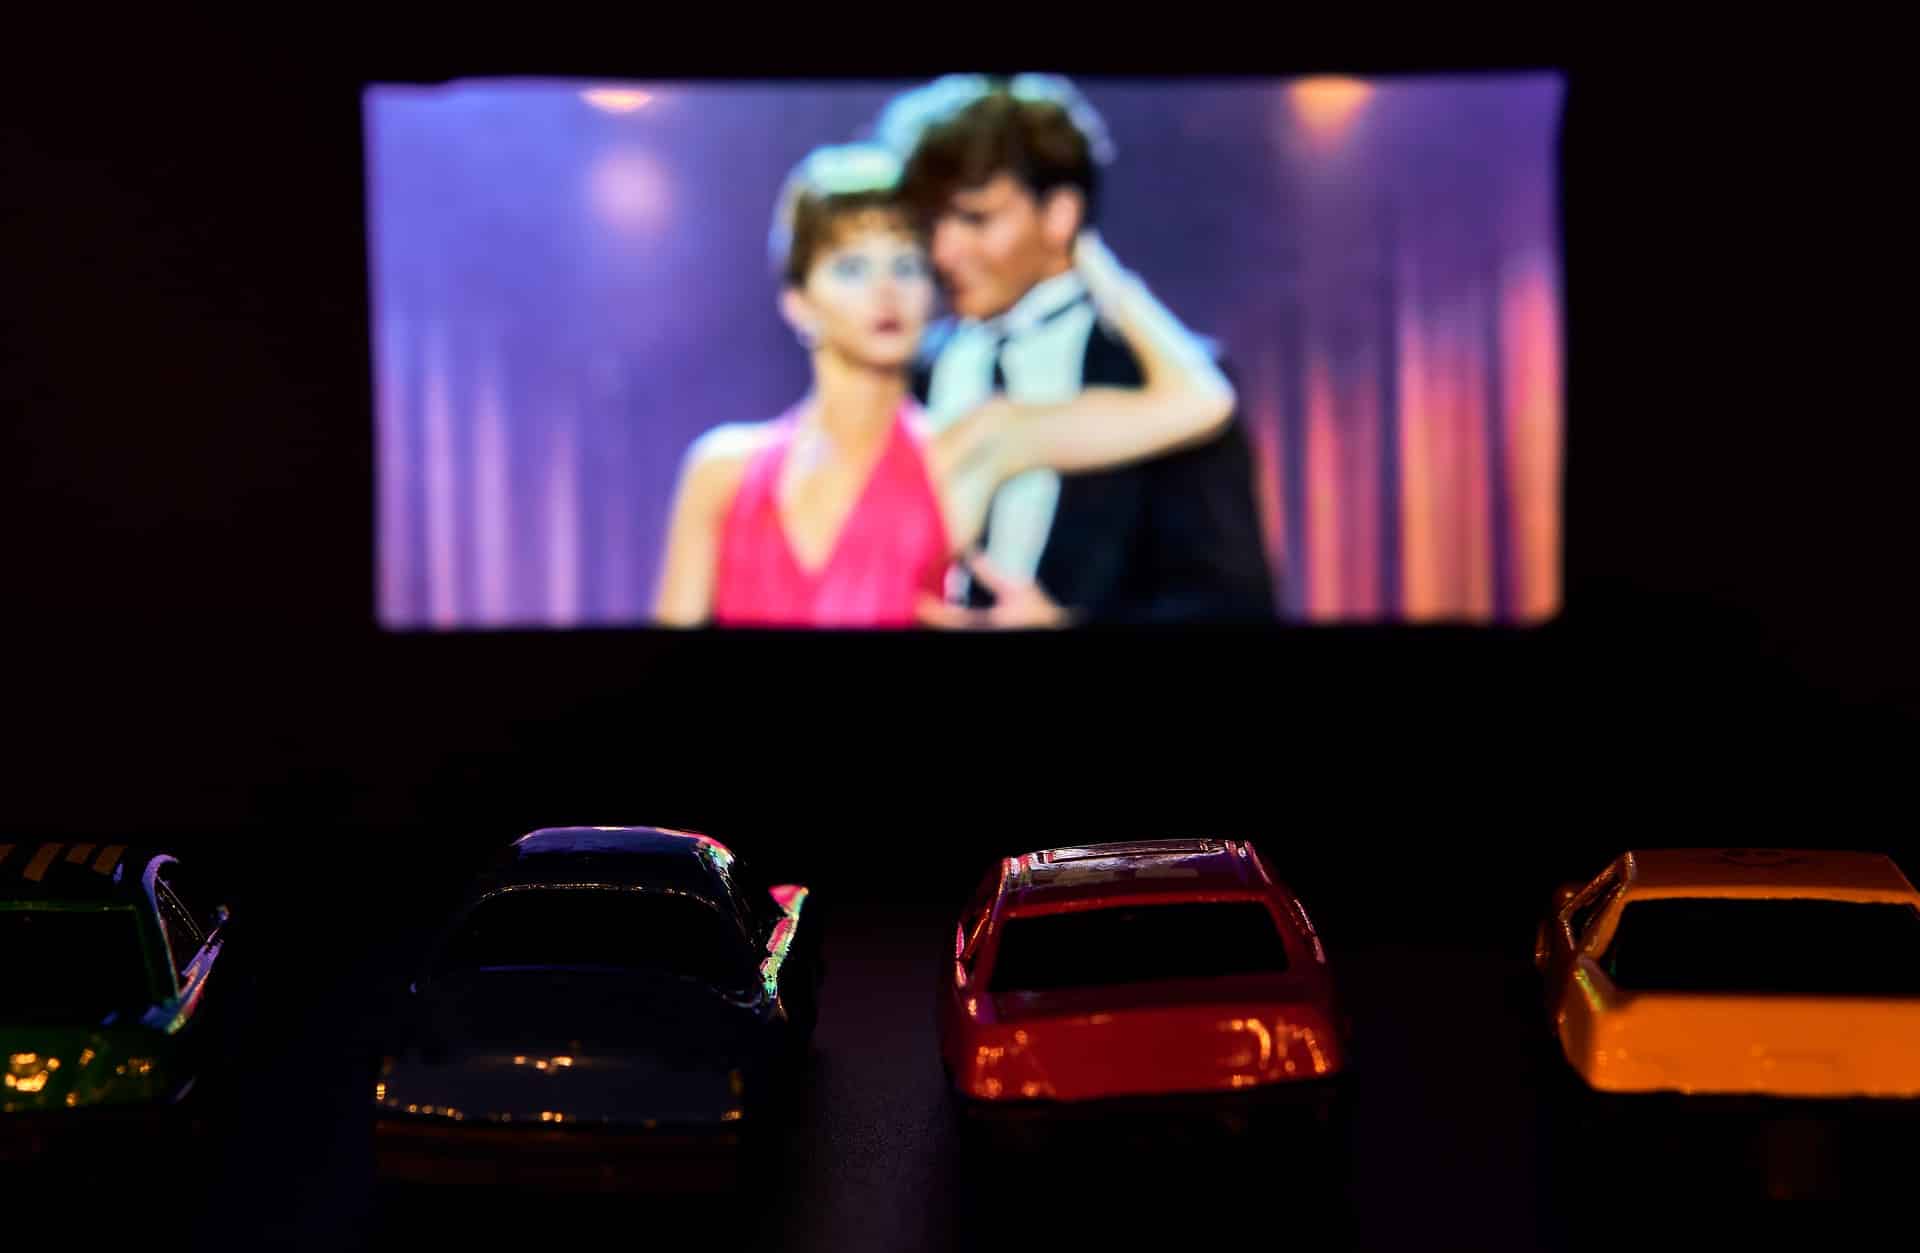 The movie Dirty Dancing playing on the screen of a drive-in movie theater